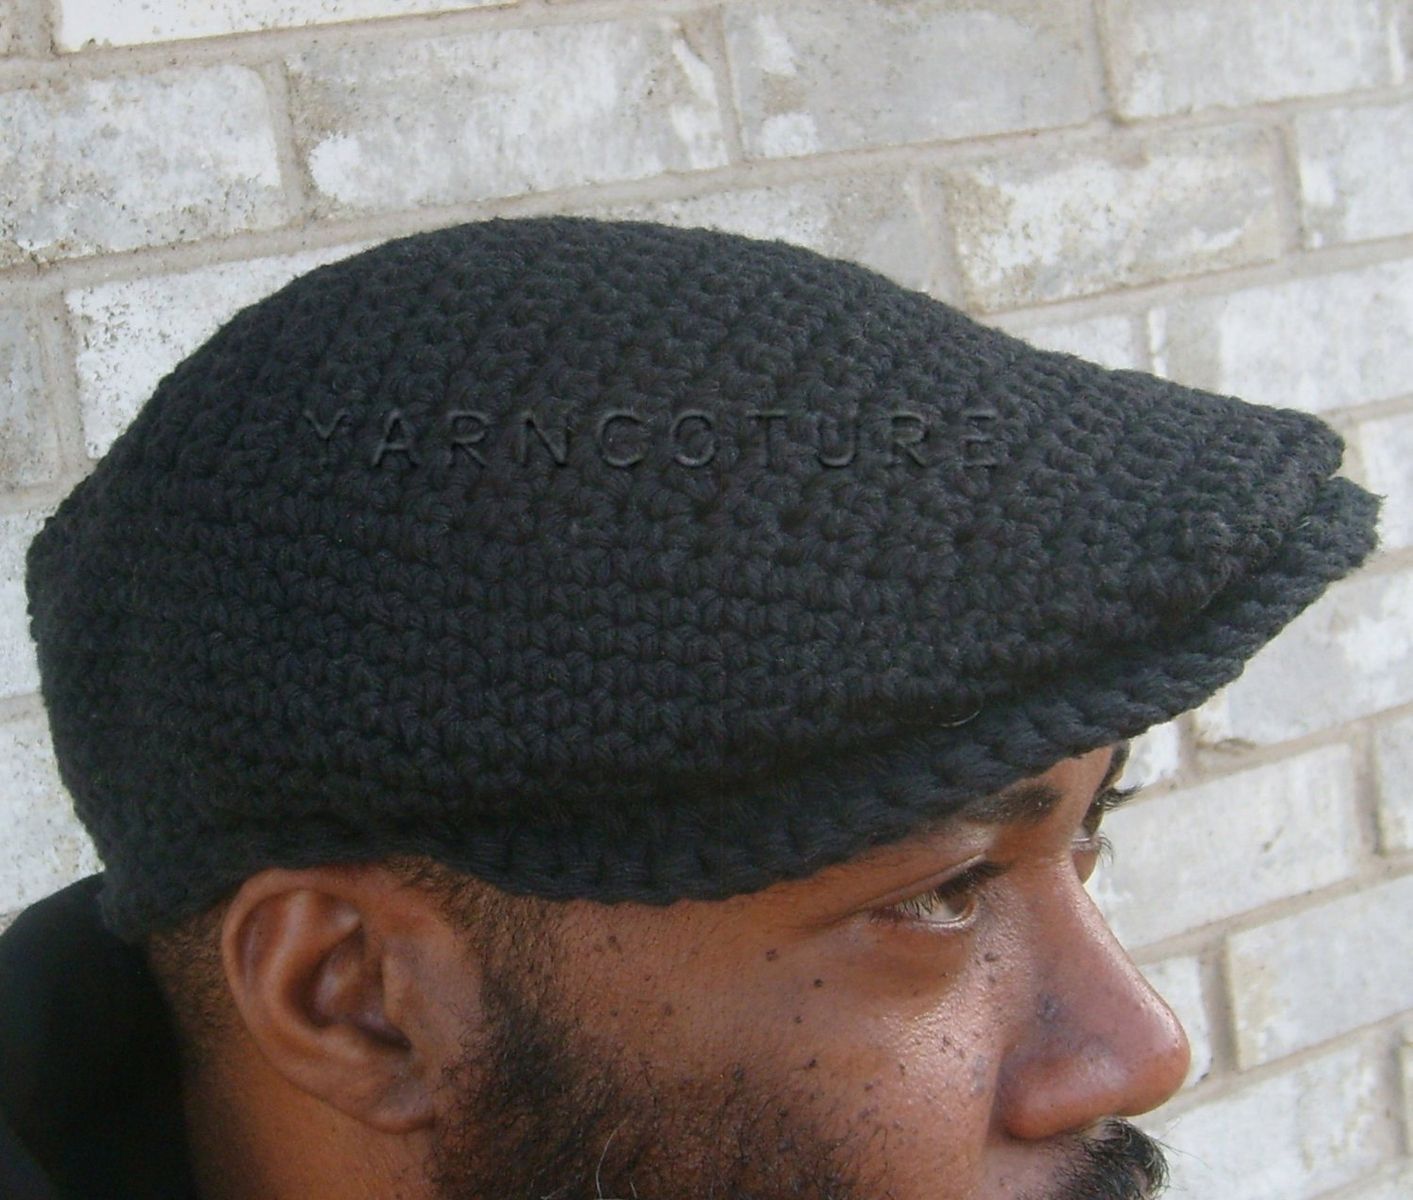 Dierentuin Uit Verschuiving Handmade The Jeff Sport Cap For Men - In Cool Absorbent Cotton by Y A R N C  O T U R E | CustomMade.com